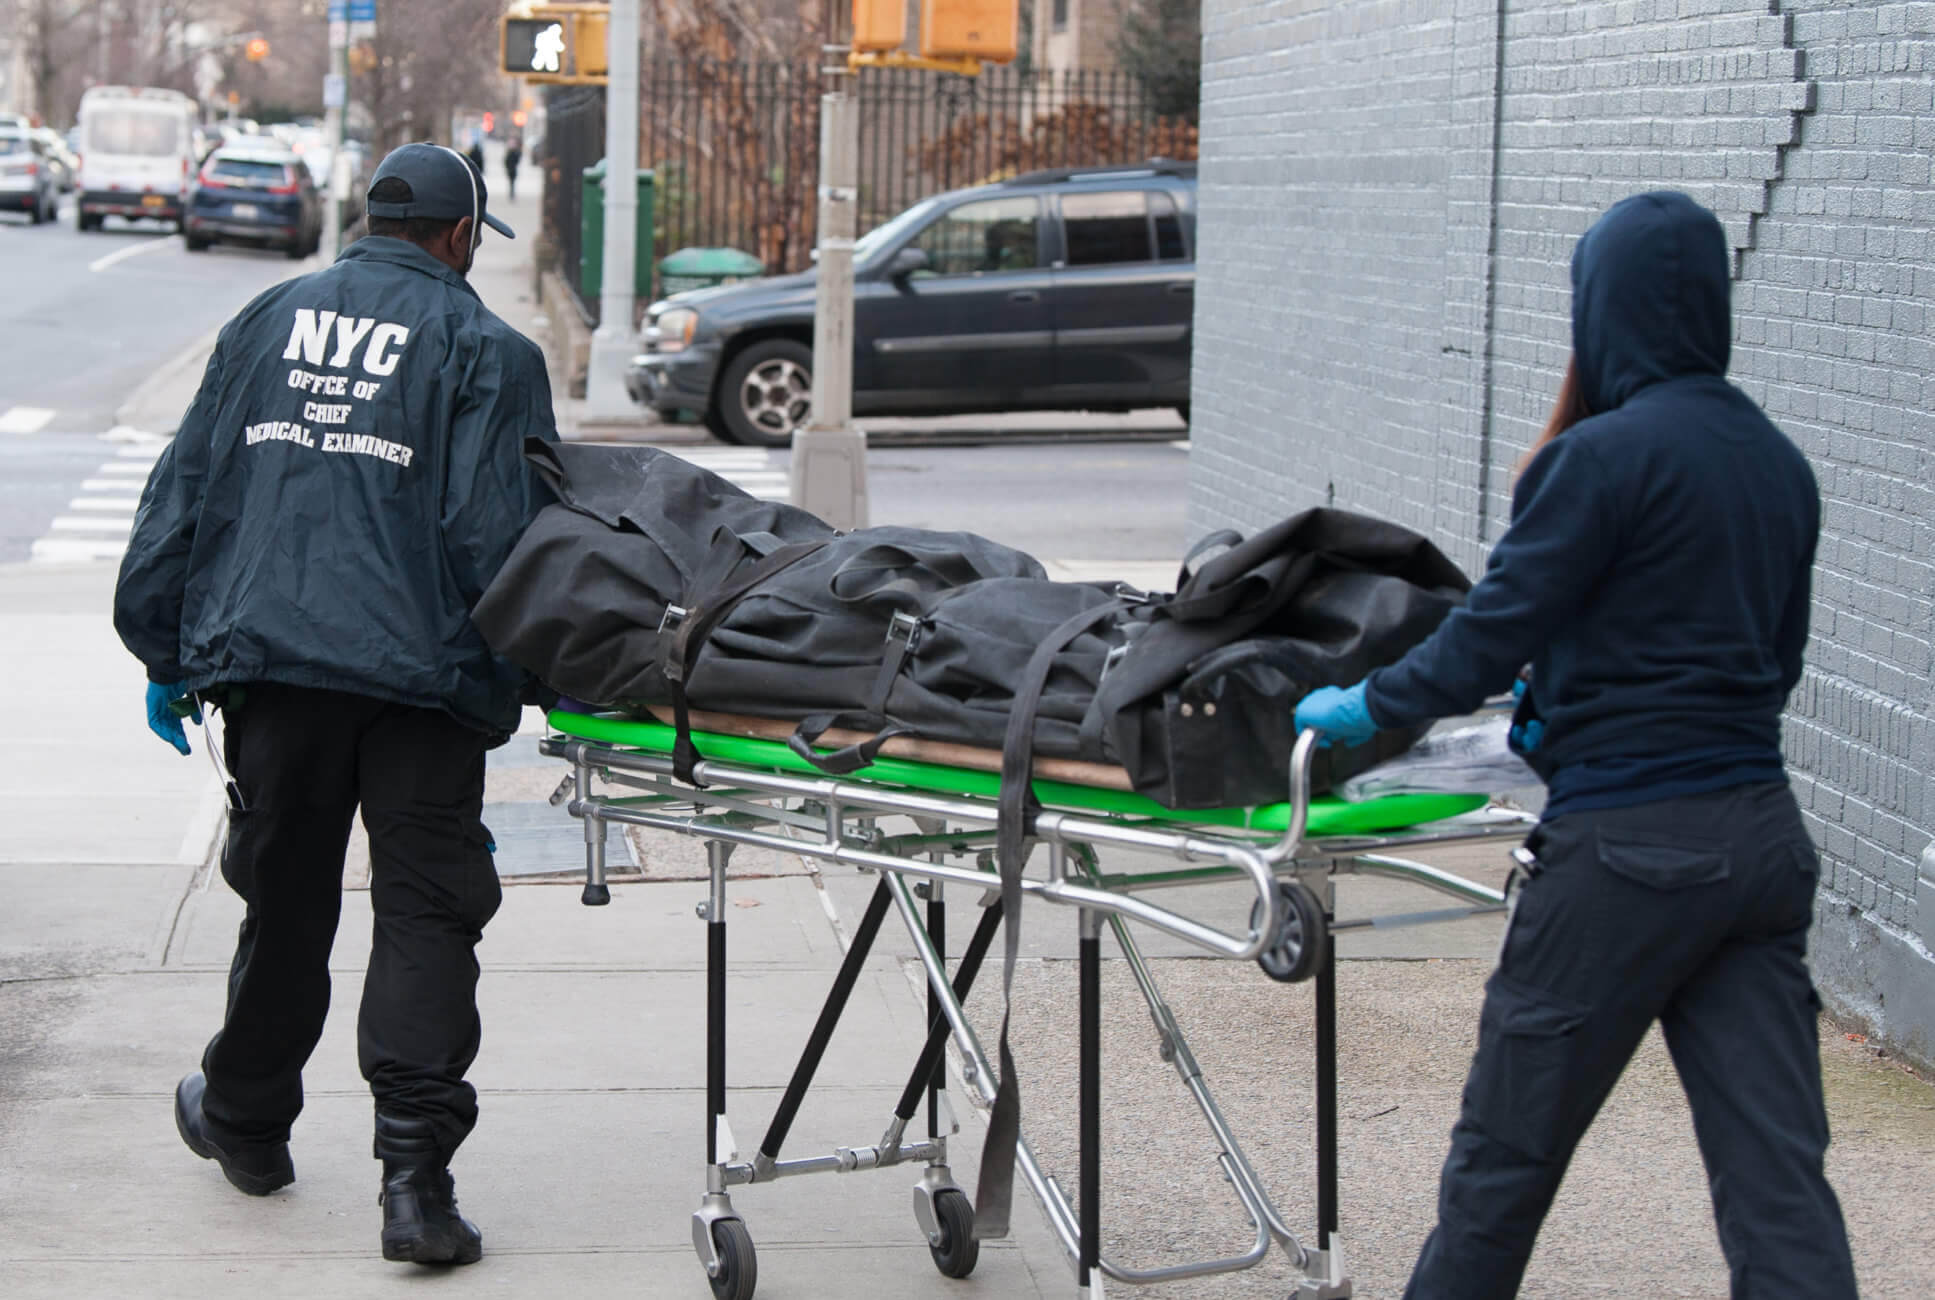 Couple found dead in Bronx apartment may have suffered overdoses